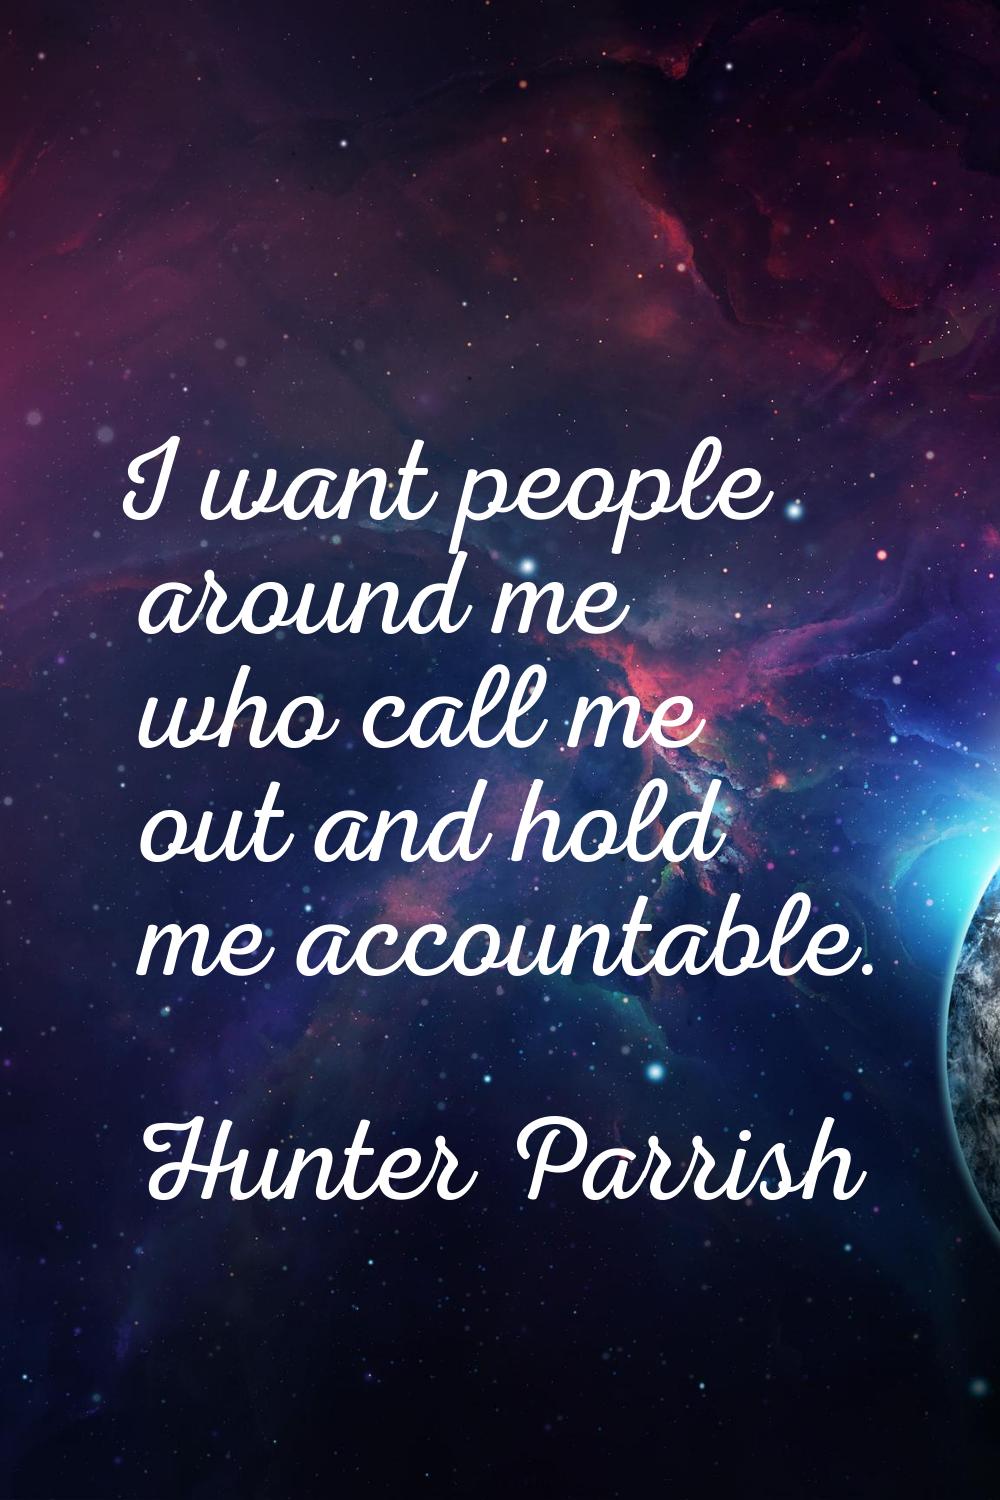 I want people around me who call me out and hold me accountable.